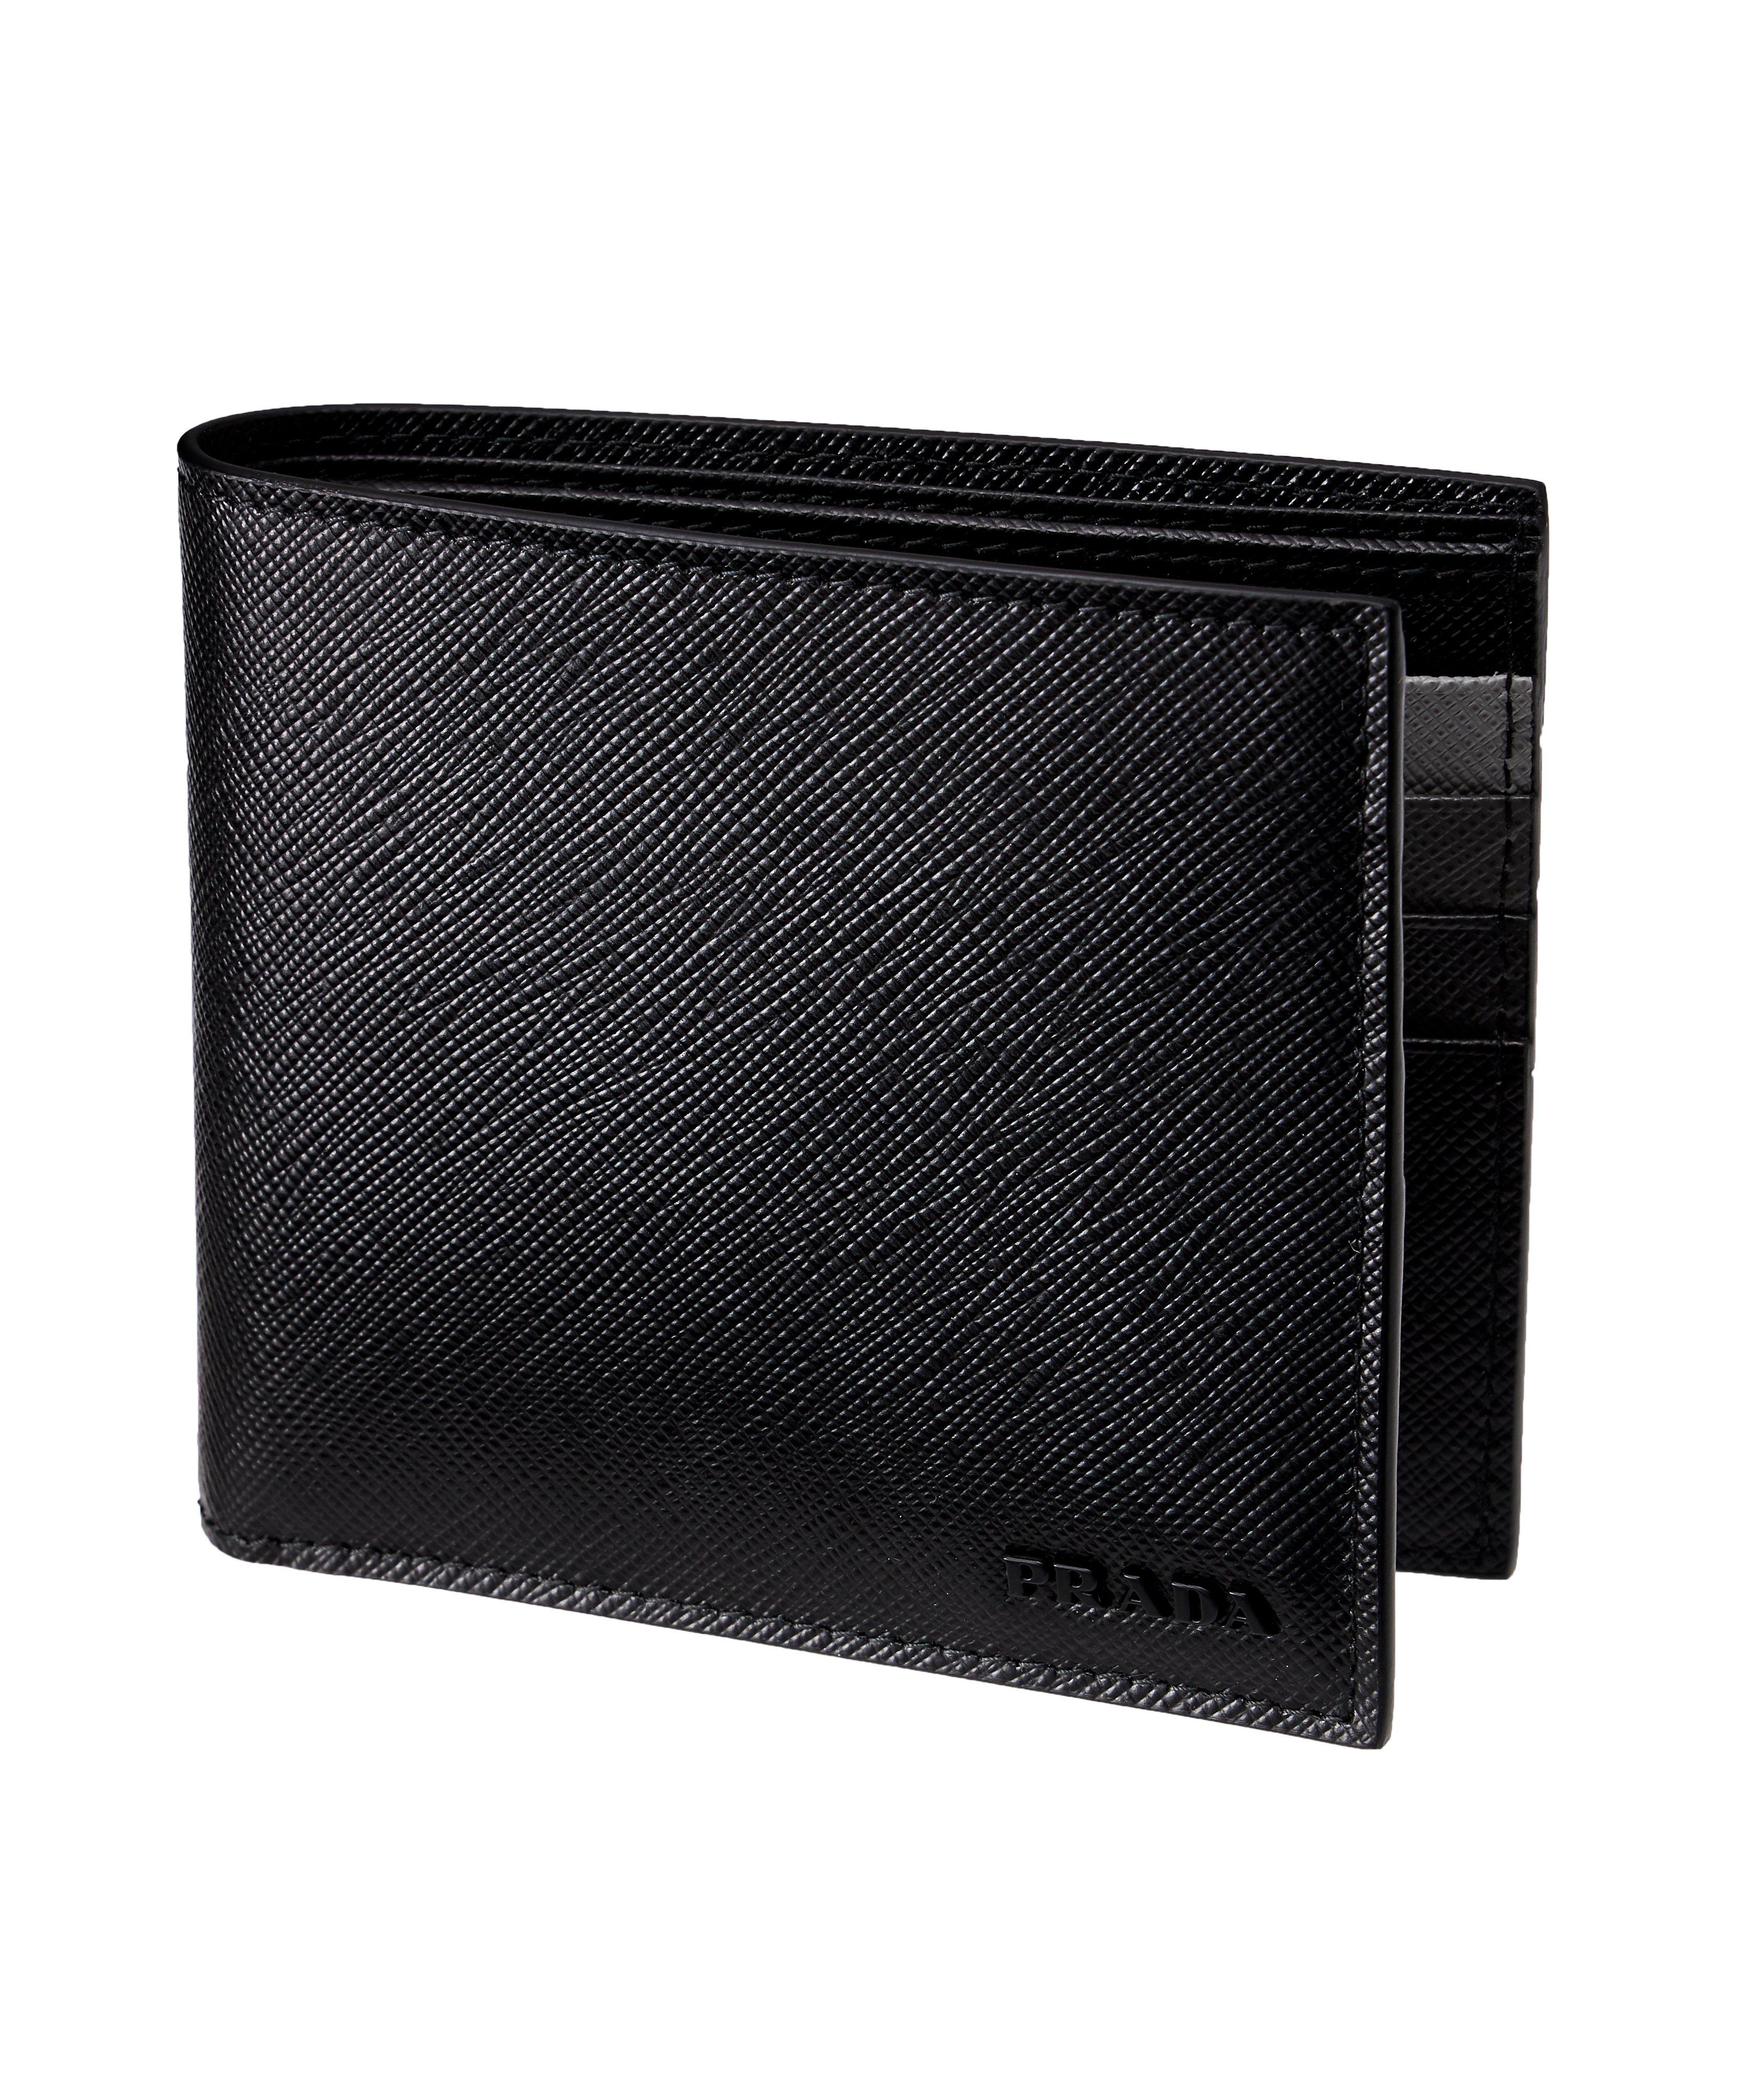 Saffiano Leather Bifold Wallet image 0